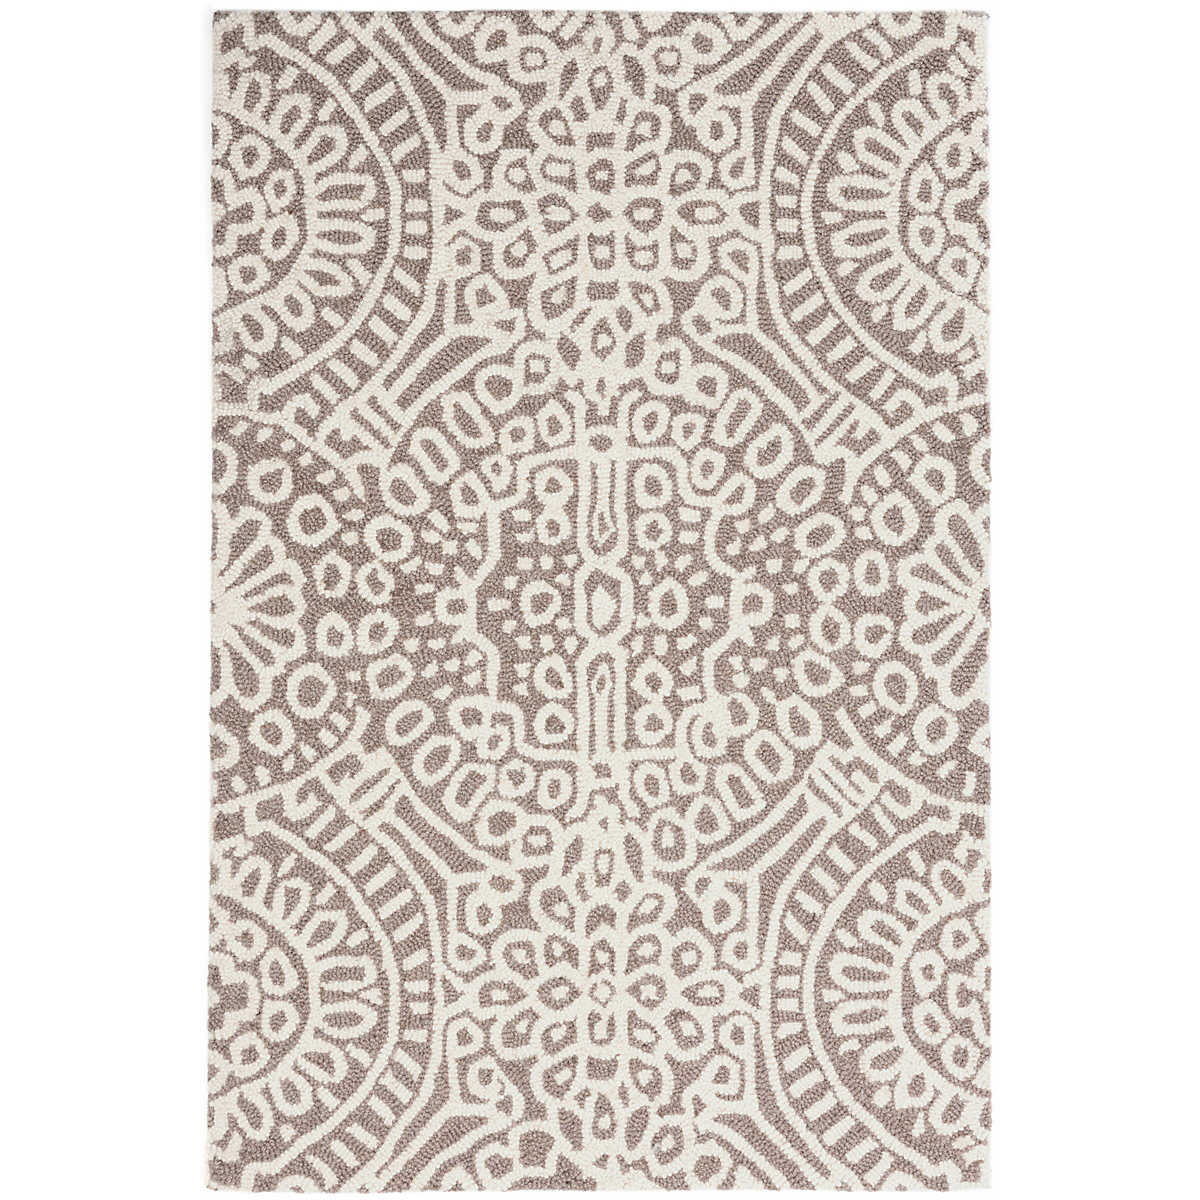 Temple Taupe Wool Micro Hooked Rug - 6'x9'